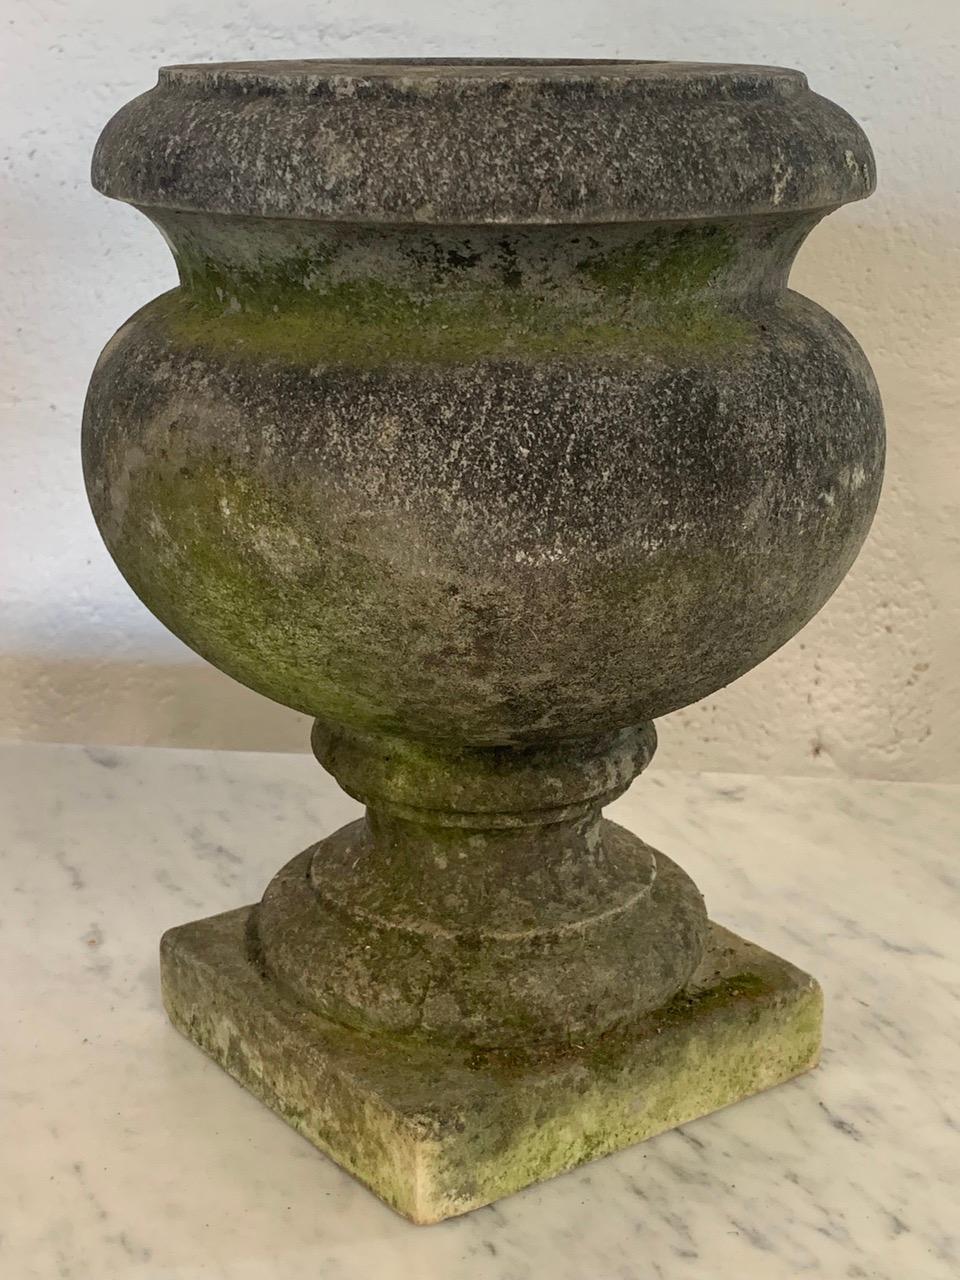 A lovely 19th century carved marble urn with beautiful weathering.
Please contact us for an accurate shipping quote.